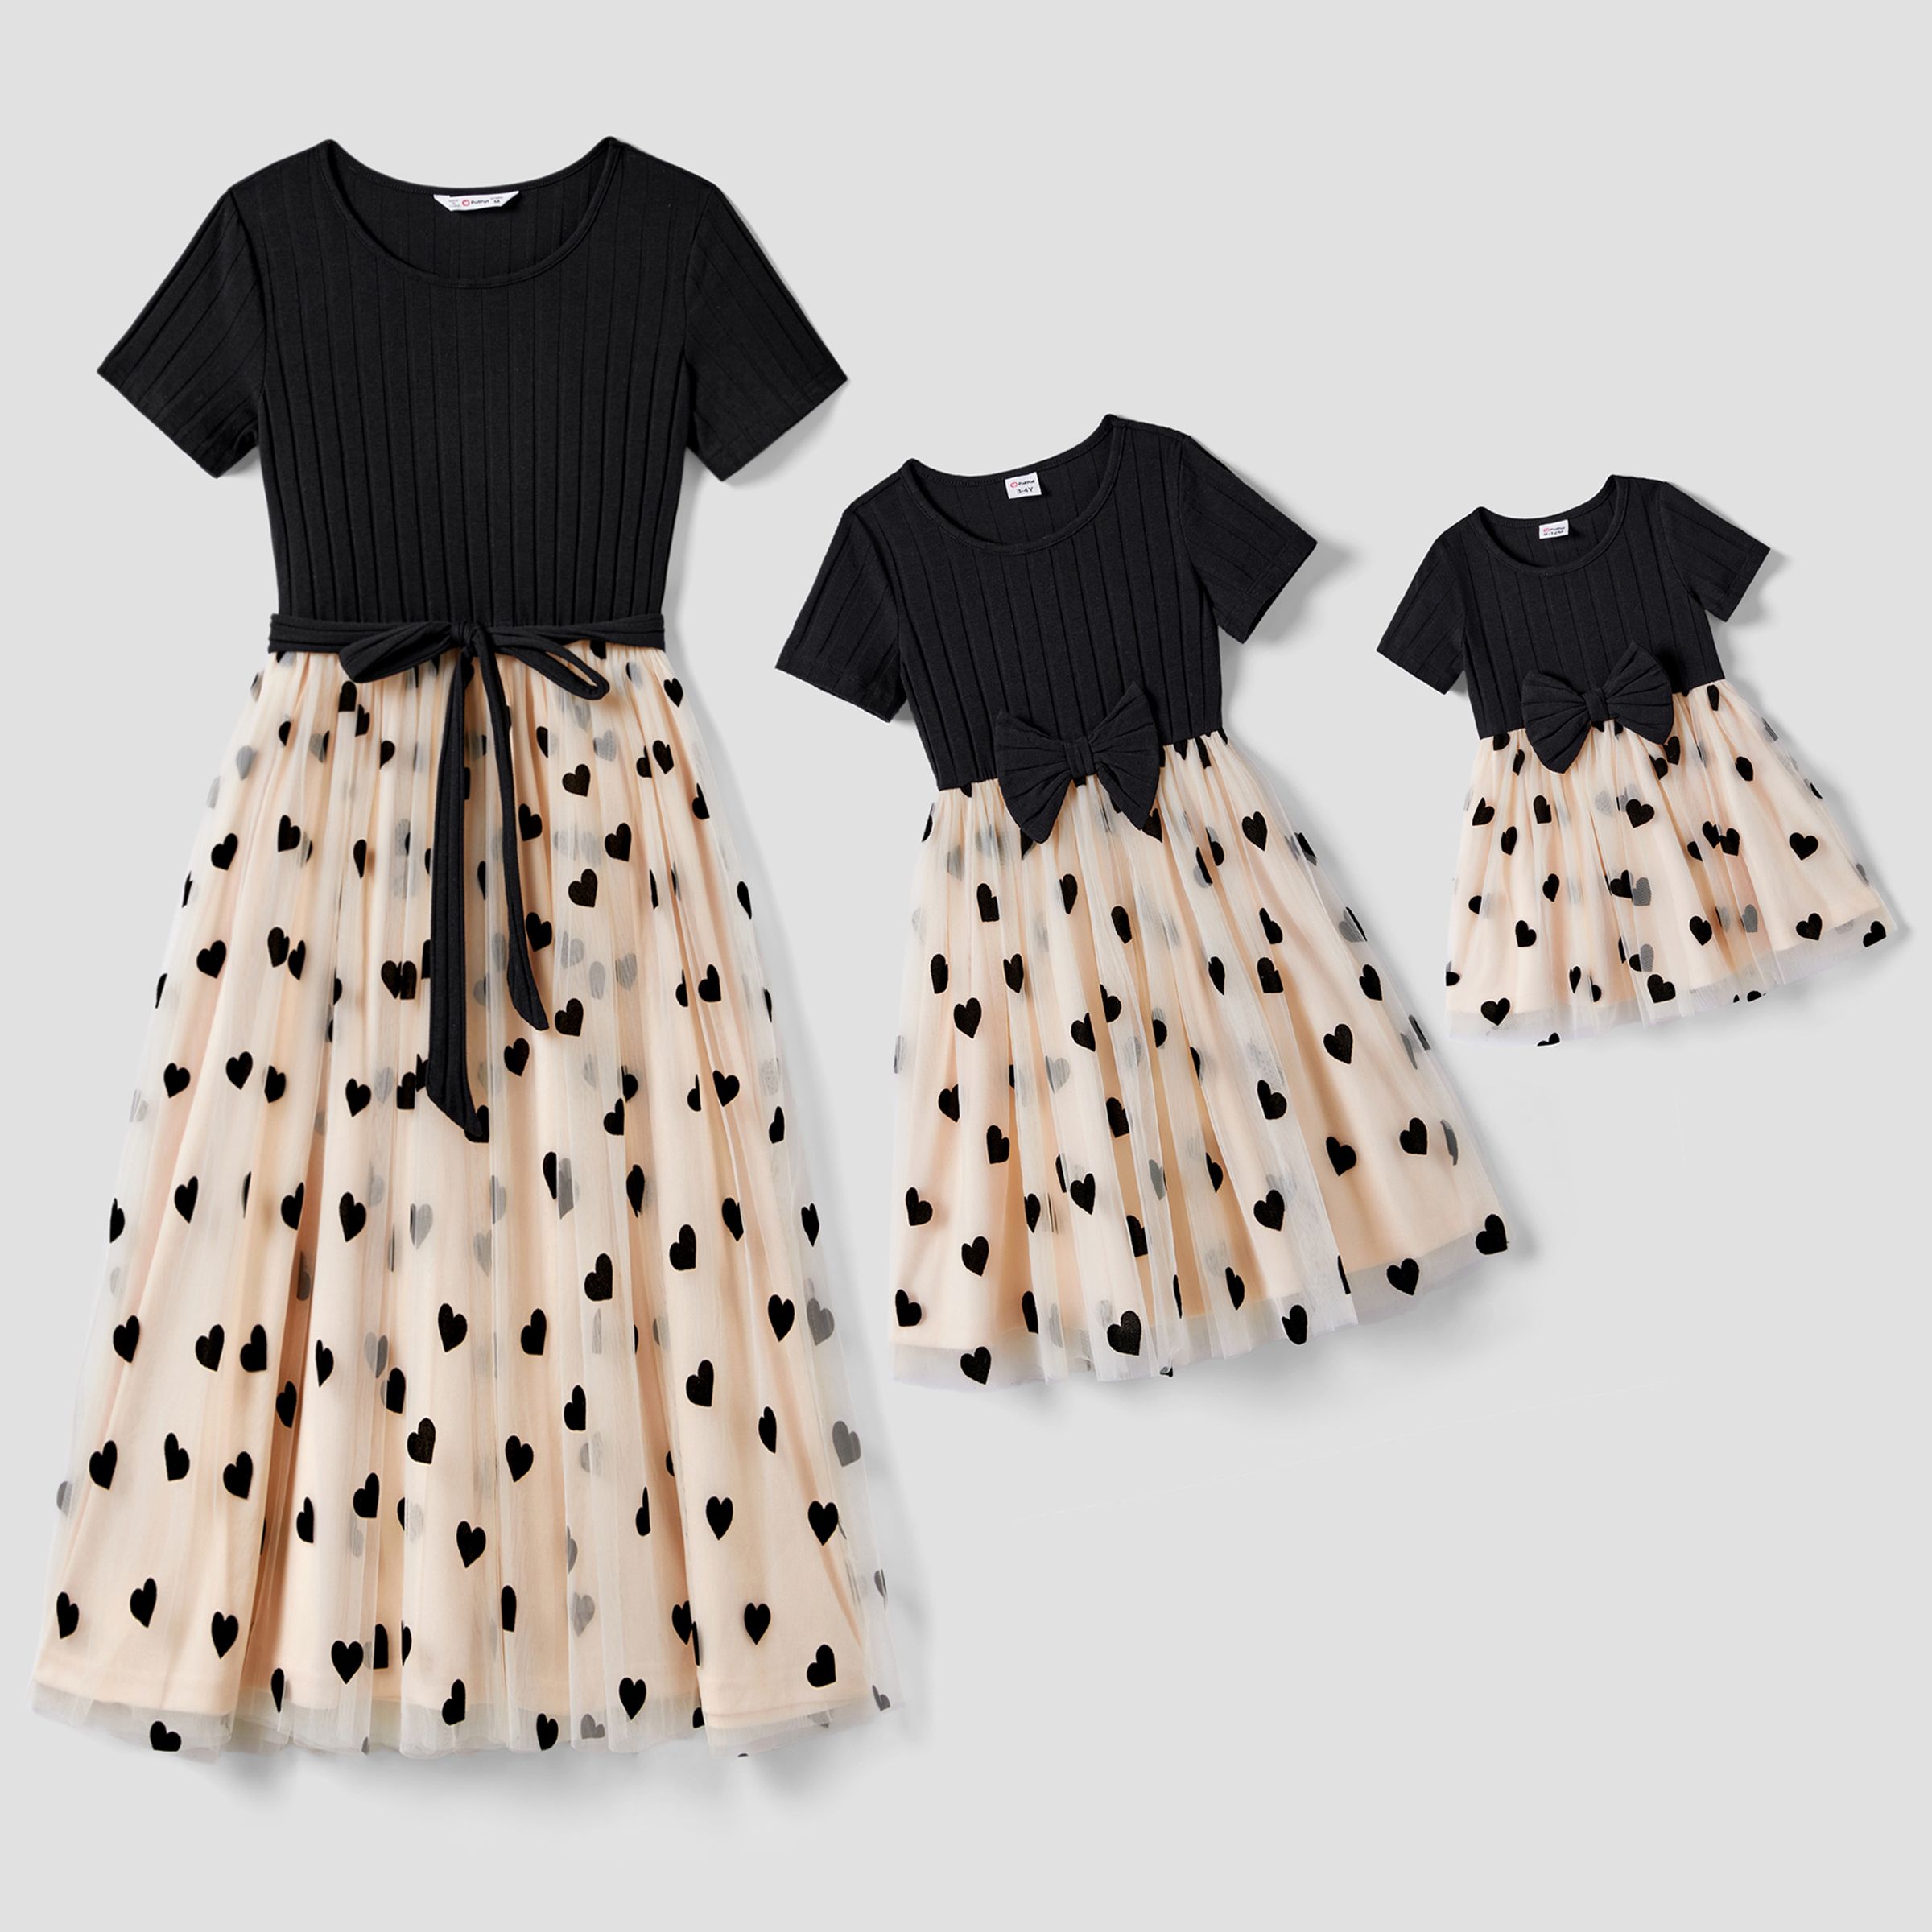 Mommy And Me Black Top Spliced Heart Pattern Mesh Dresses